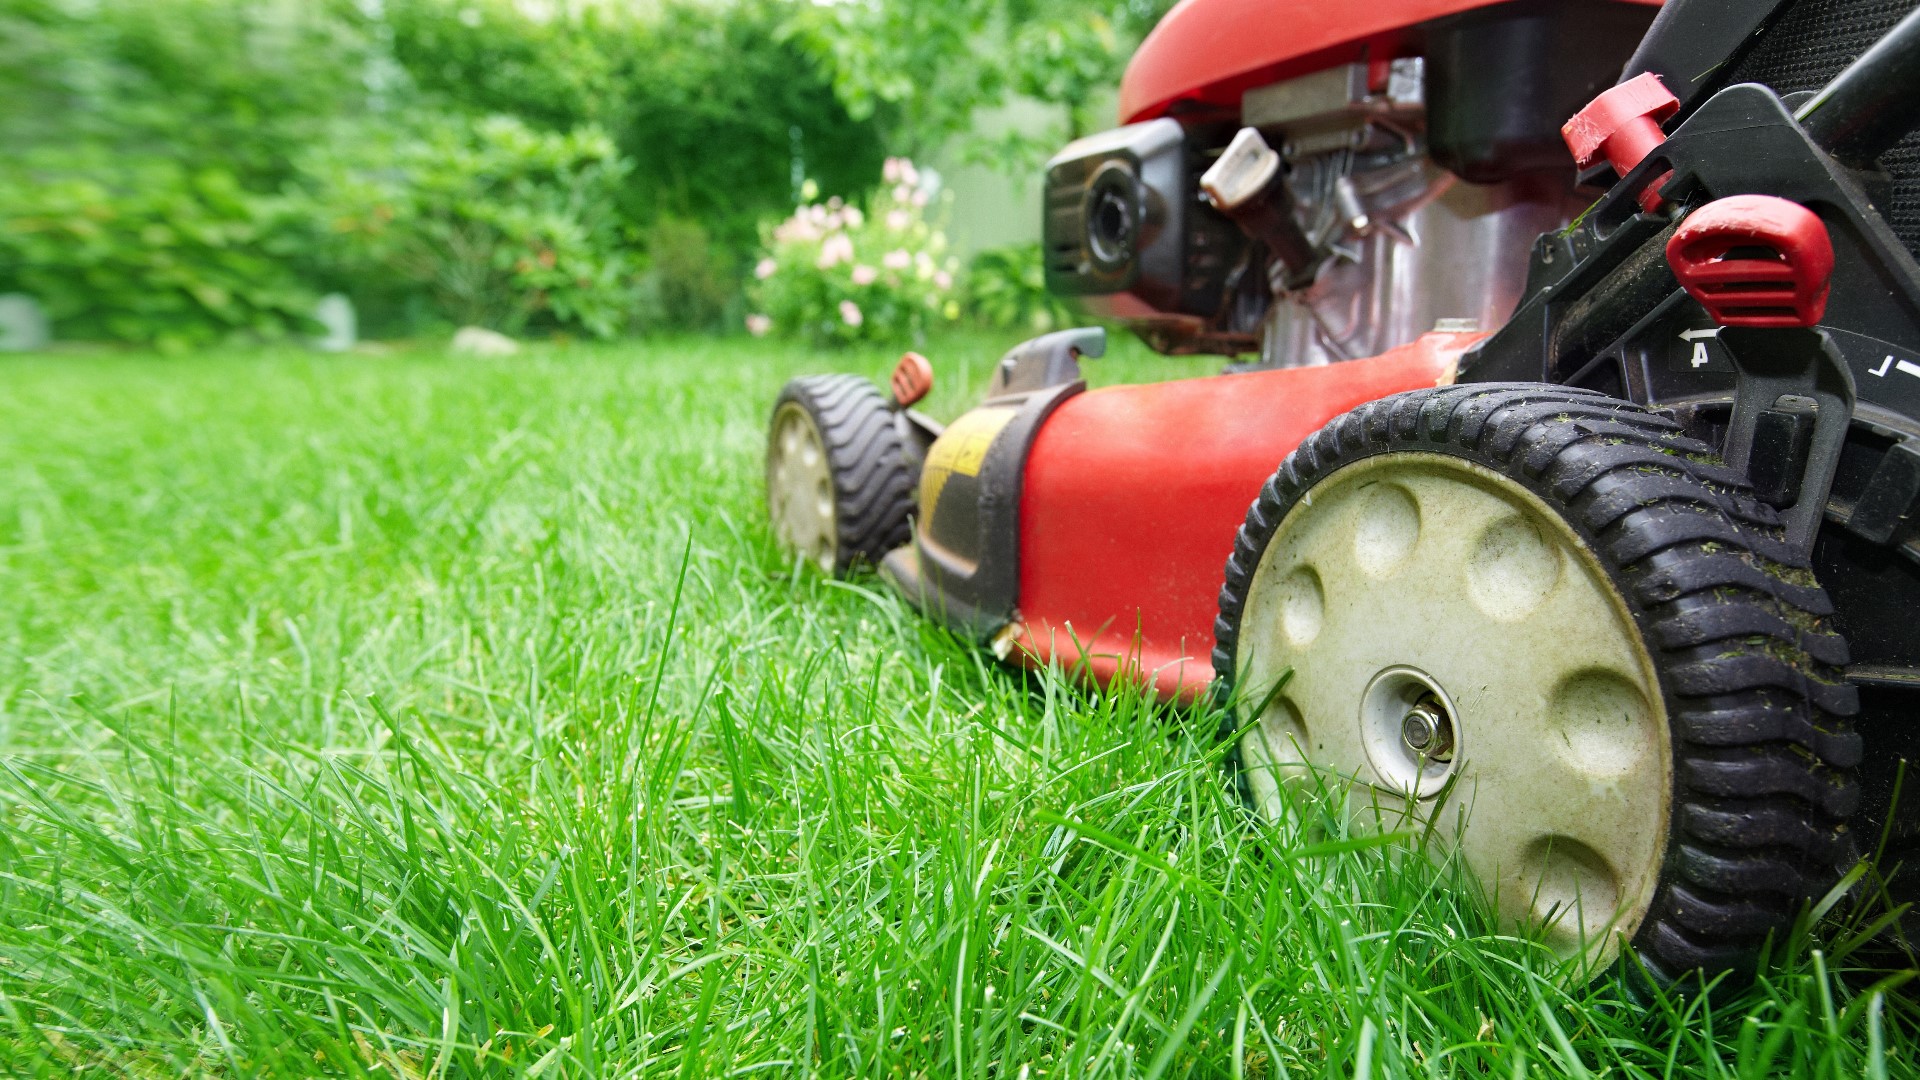 Despite their small size, gas-powered lawn tools emit a large amount of pollution.